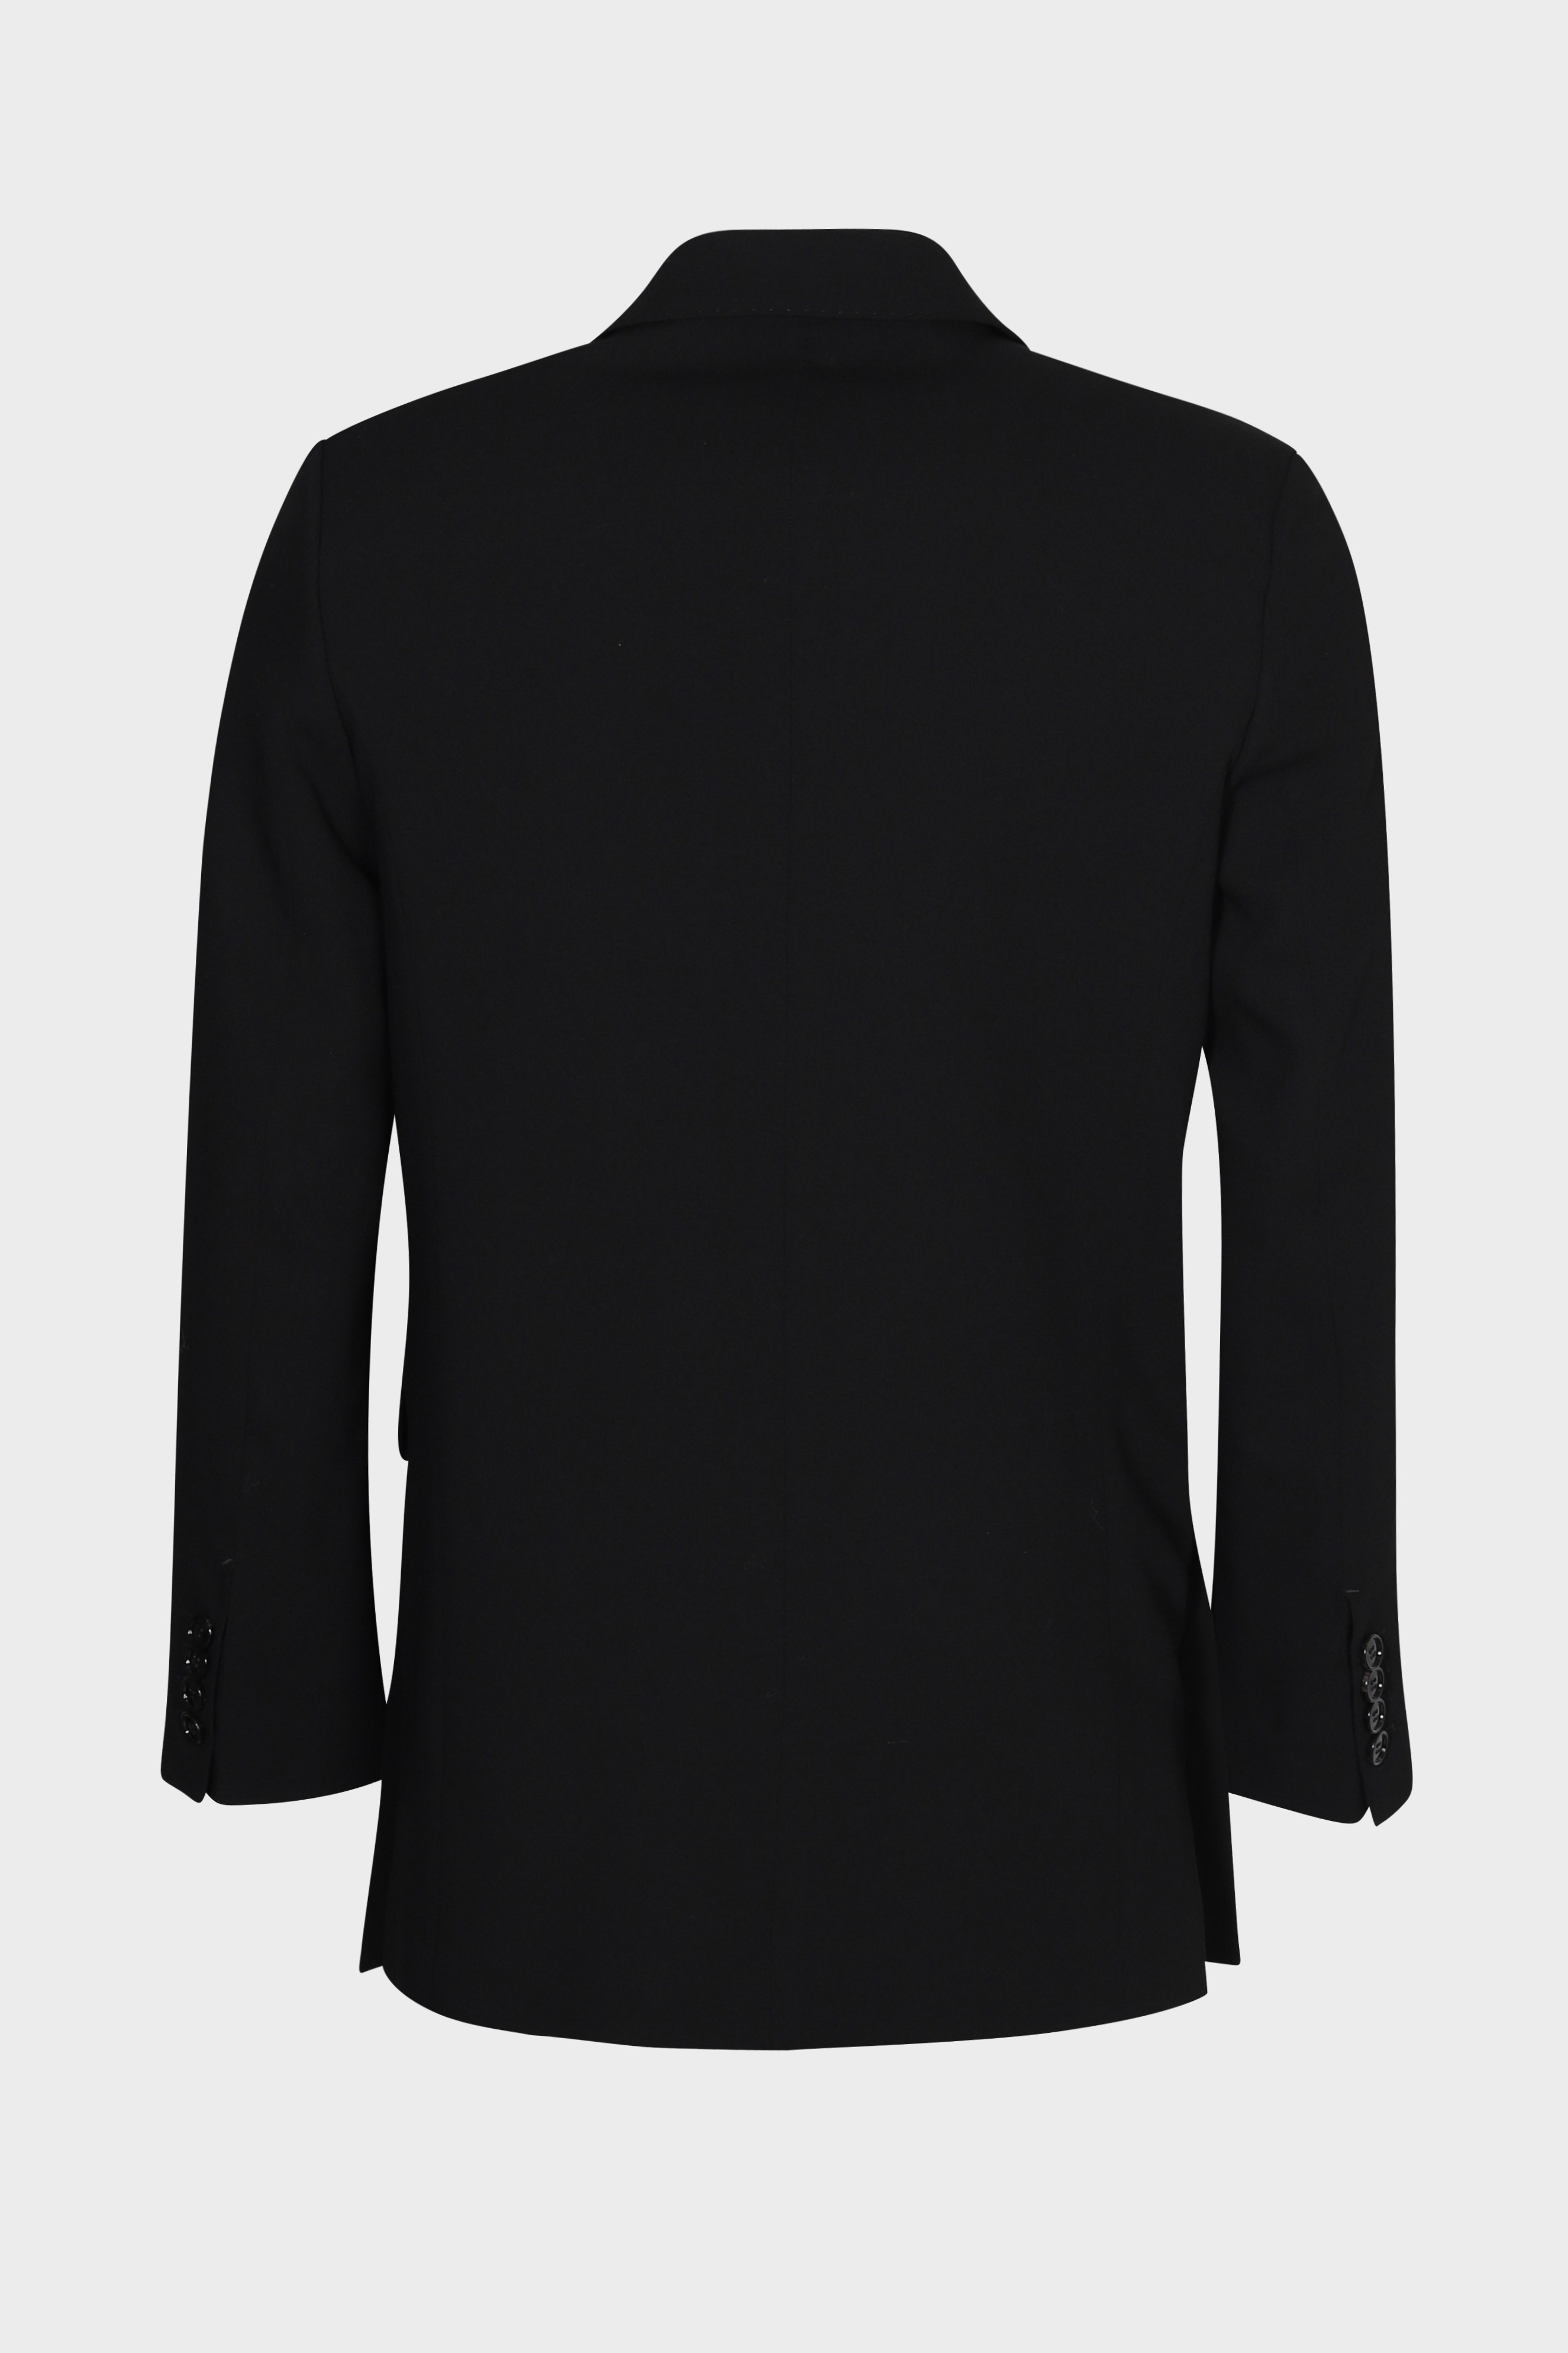 AMI PARIS Double Breasted Oversize Jacket in Black 50